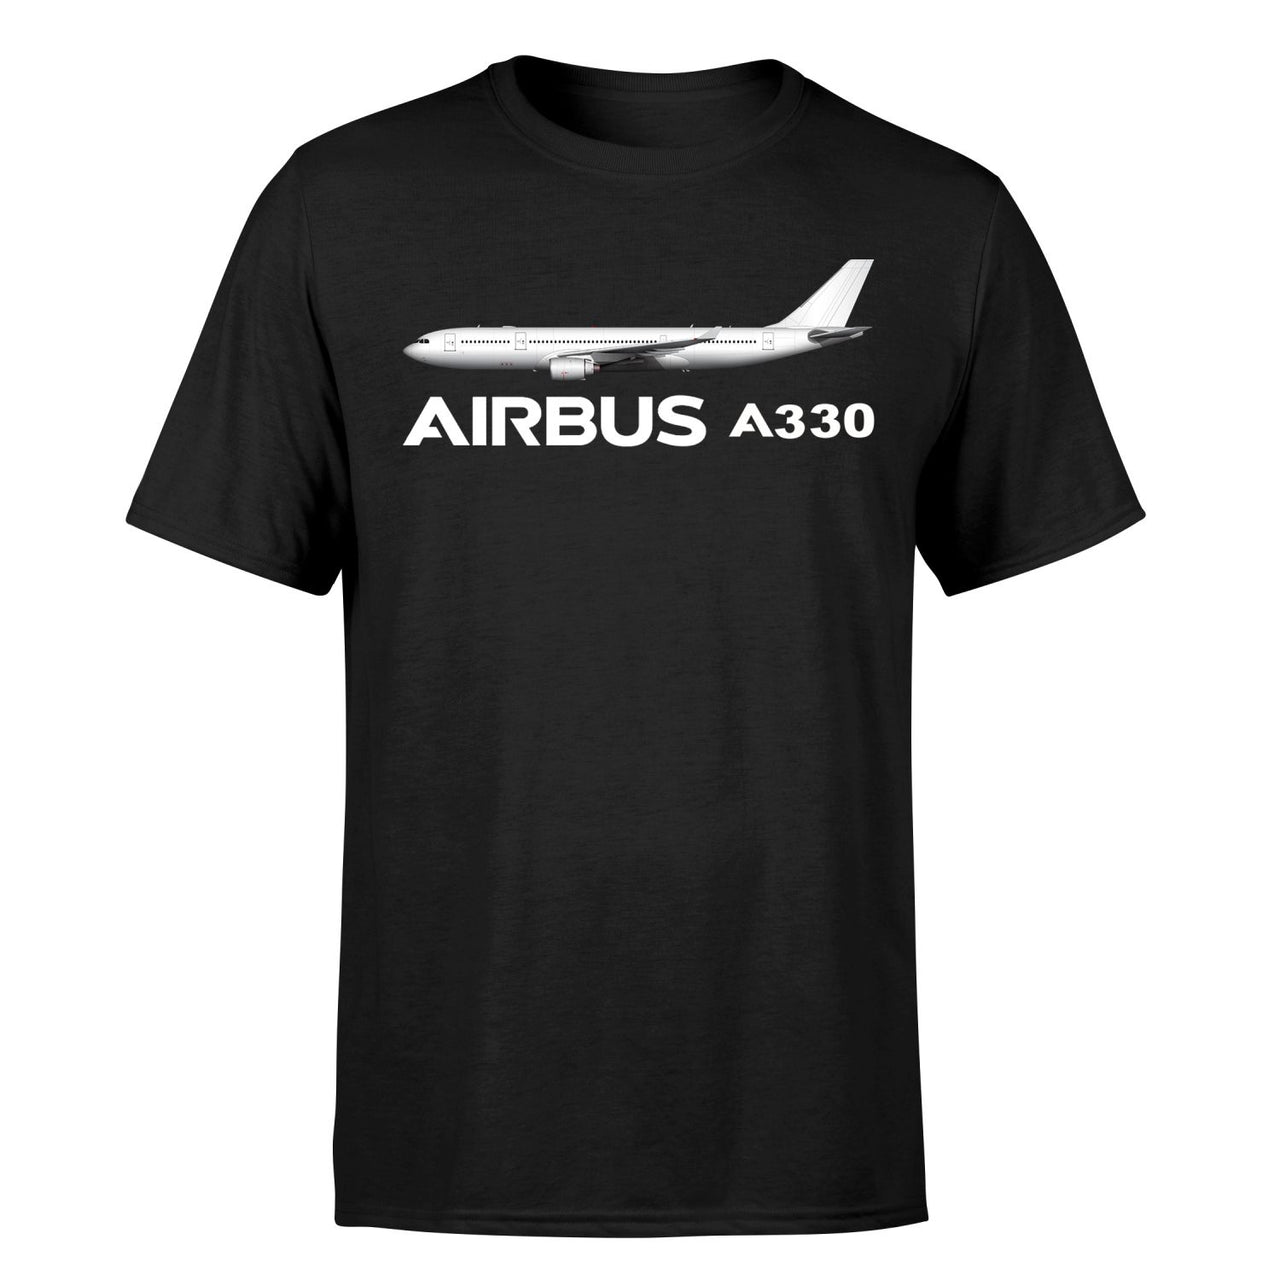 The Airbus A330 Designed T-Shirts